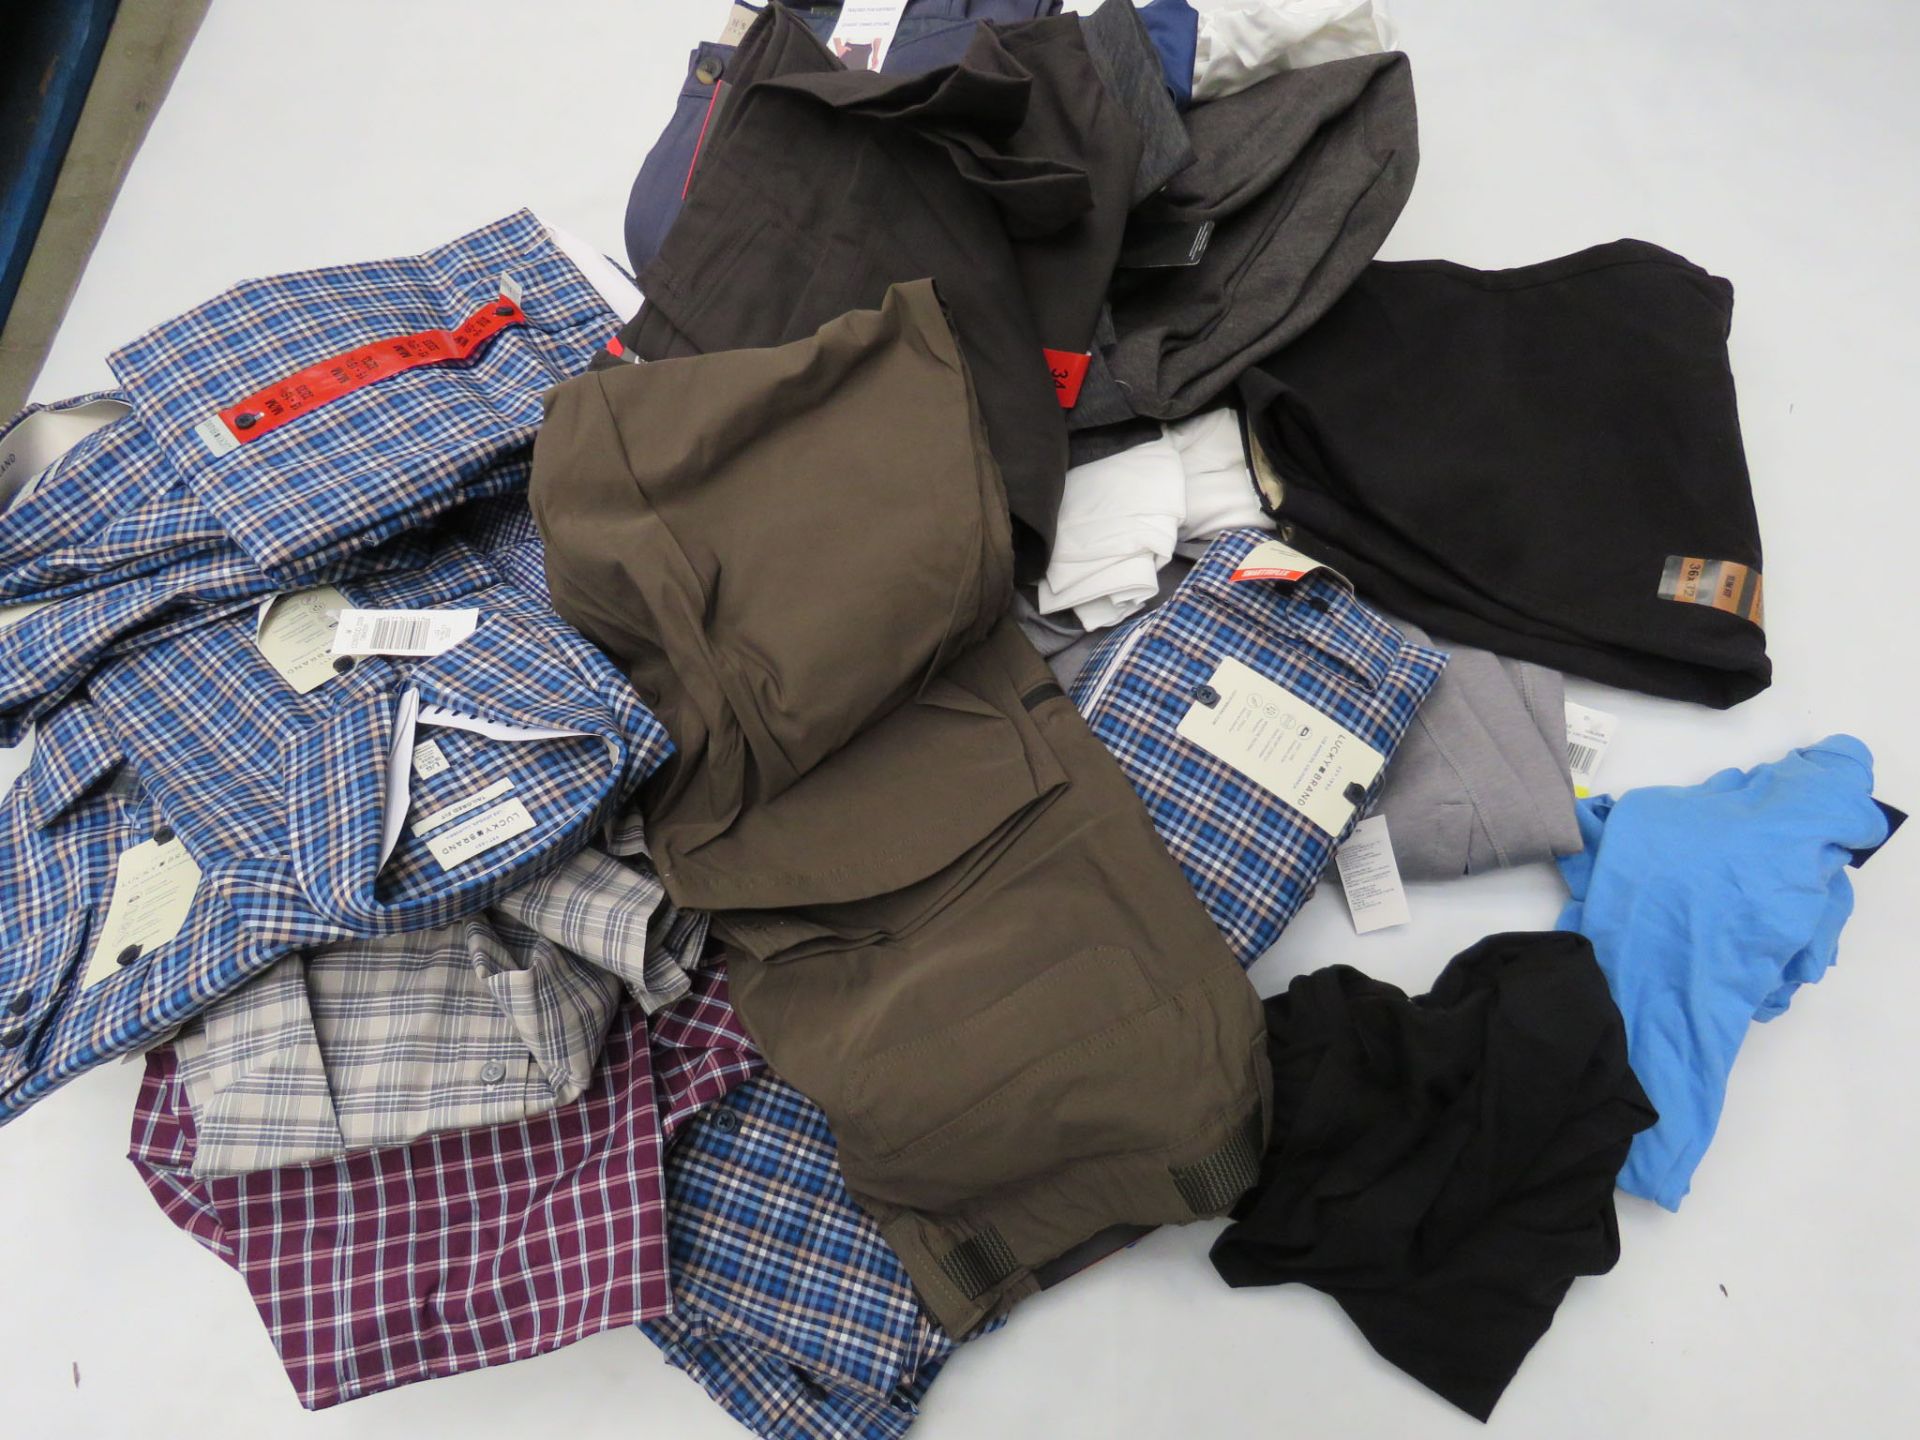 Large bag of mixed mens clothing incl. shirts, Tommy Hilfiger tops, etc.